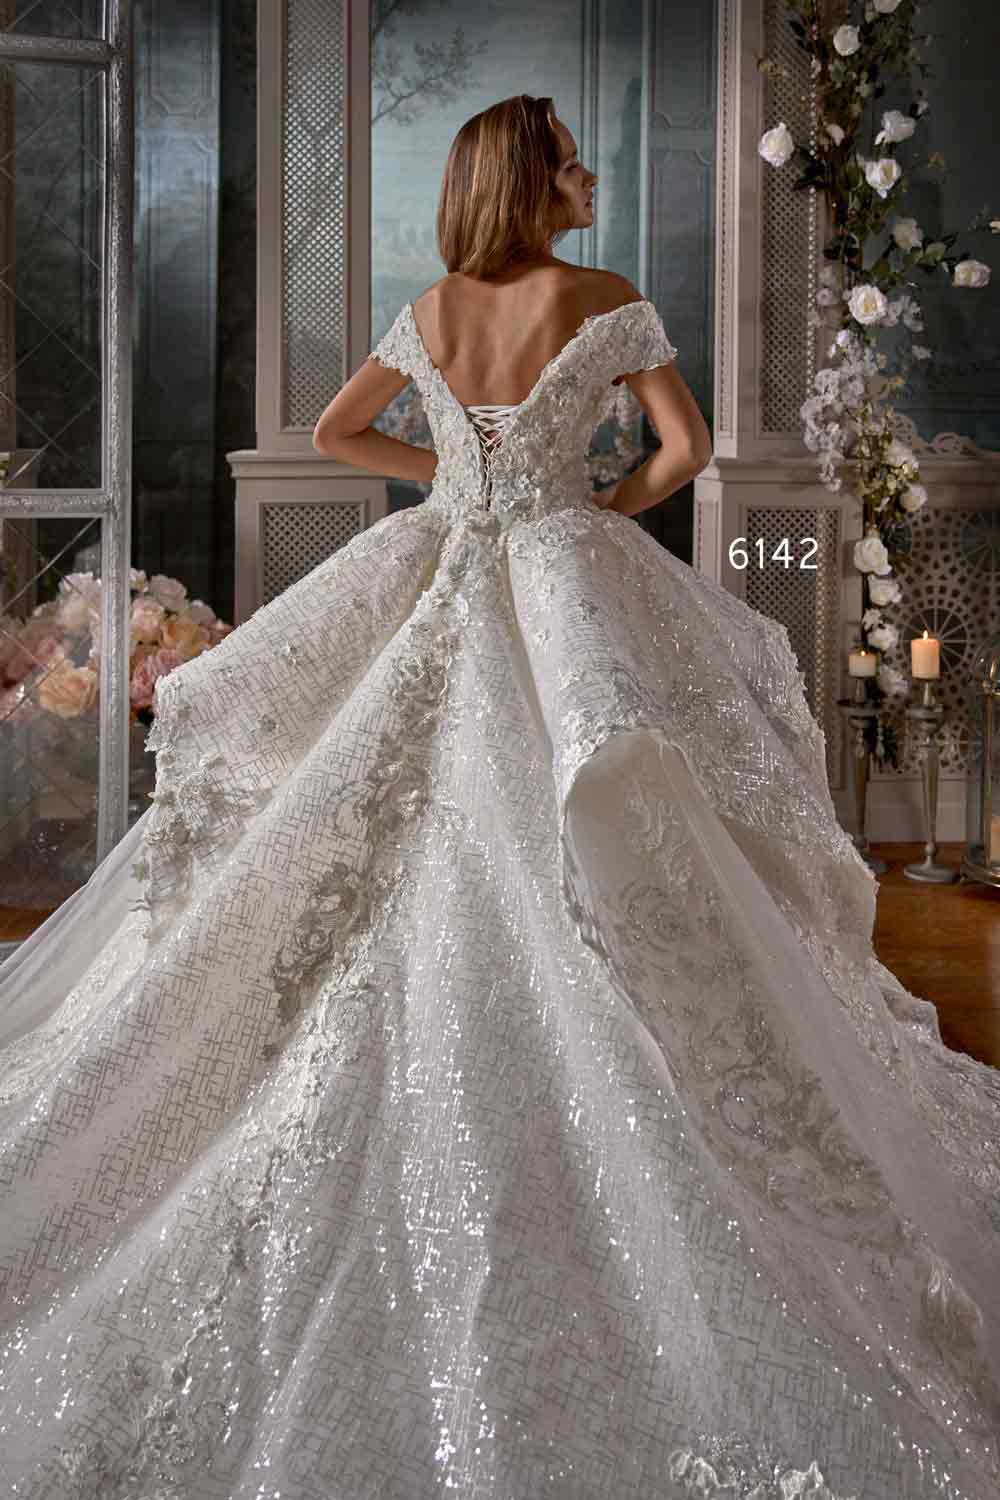 Great Wedding Dresses Dubai Online of the decade Check it out now 